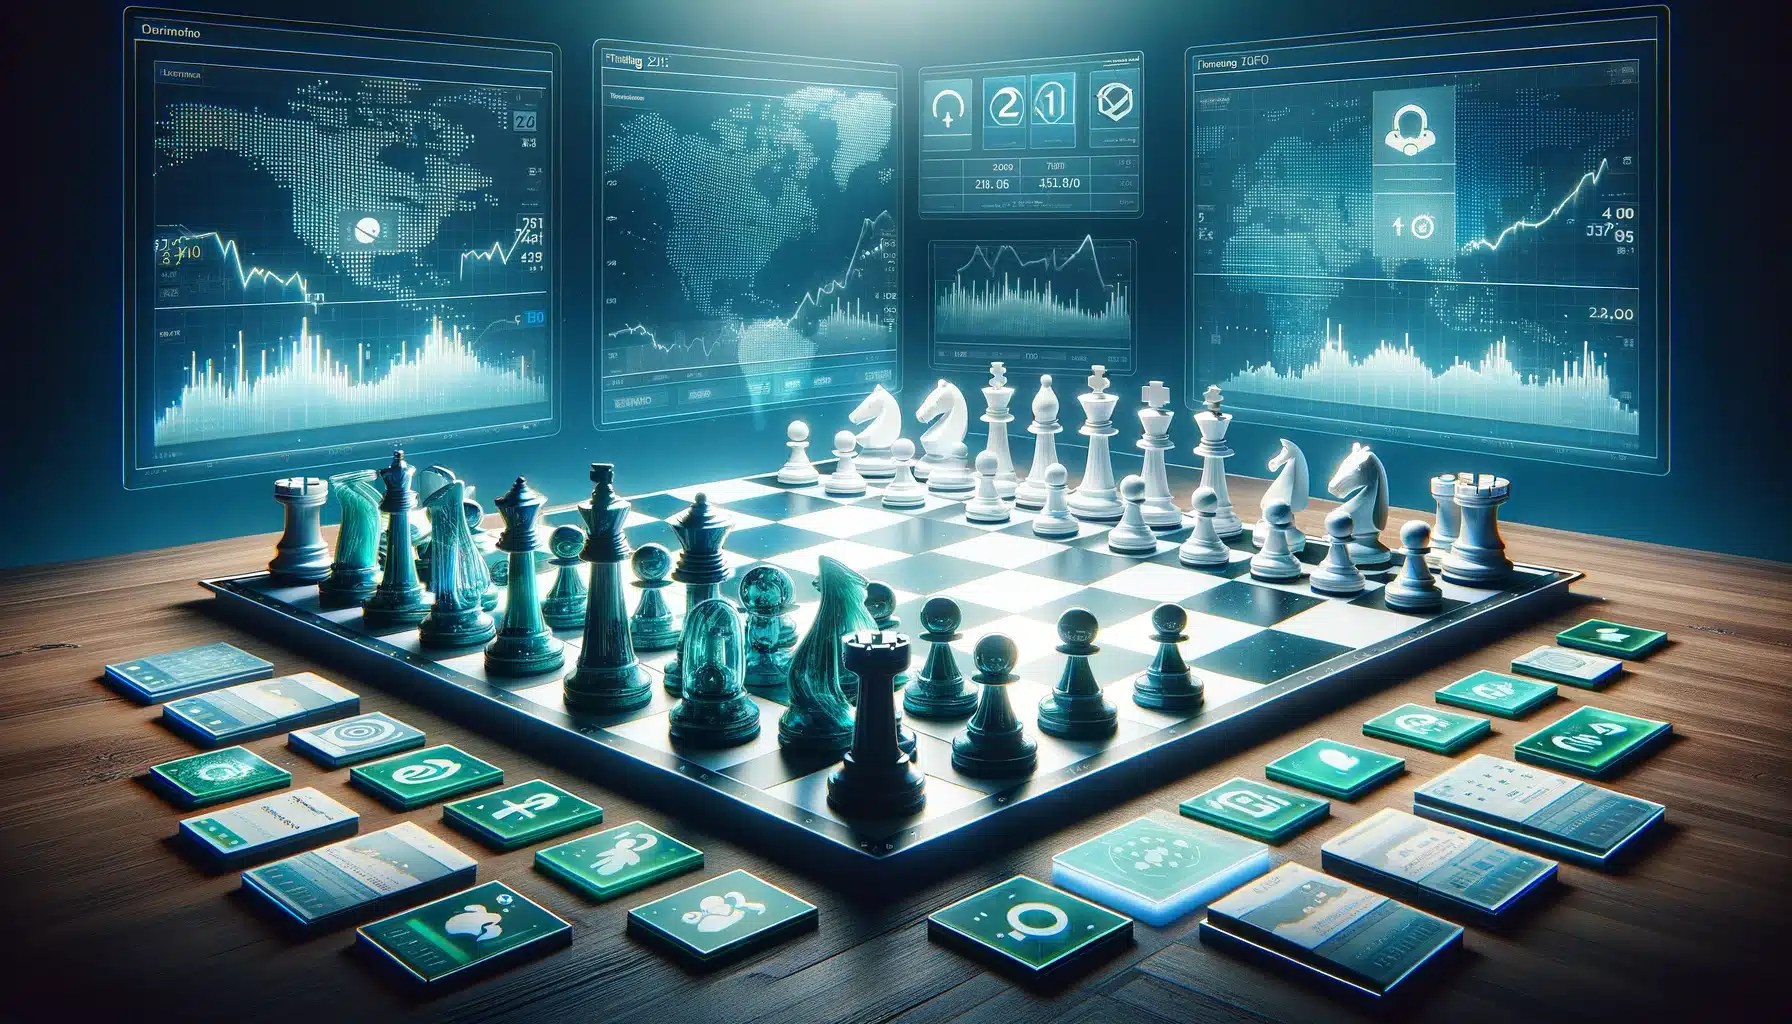 visualizing the strategic competition between 'Trading 212' and 'eToro' on a chessboard. Each side represents the unique features and ethos of the platforms through the design and color scheme of the chess pieces, set against a backdrop that subtly incorporates their logos and the dynamic world of online trading